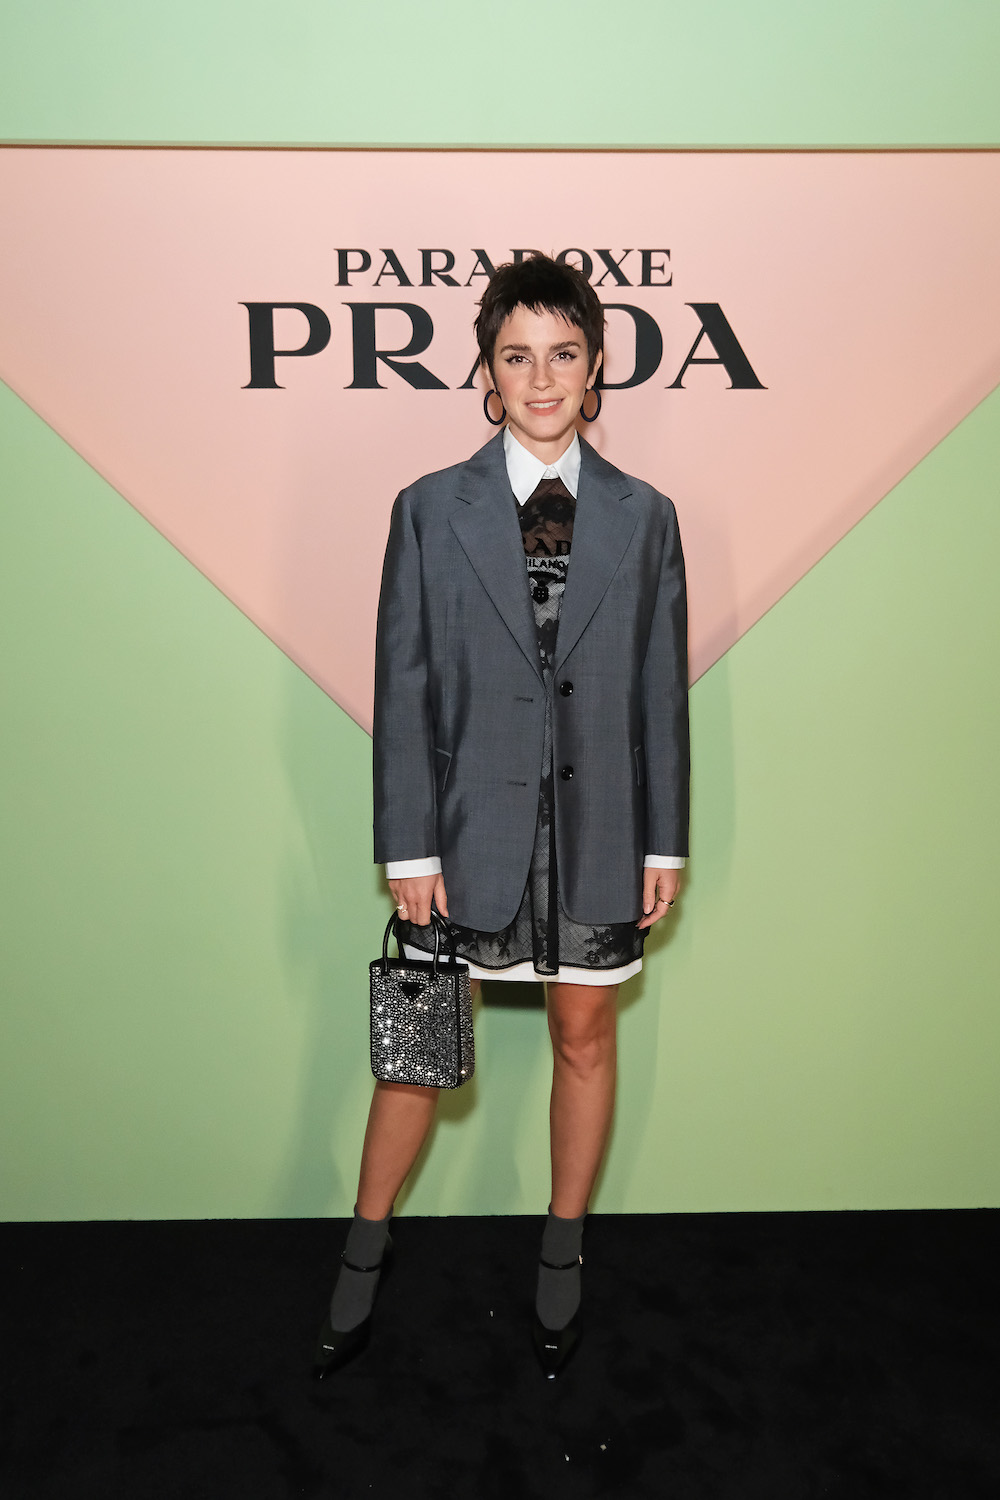 LONDON, ENGLAND - OCTOBER 13: Emma Watson attends the Prada Paradoxe fragrance launch party on October 13, 2022 in London, England.(Photo by David M. Benett/Dave Benett/Getty Images for Prada)